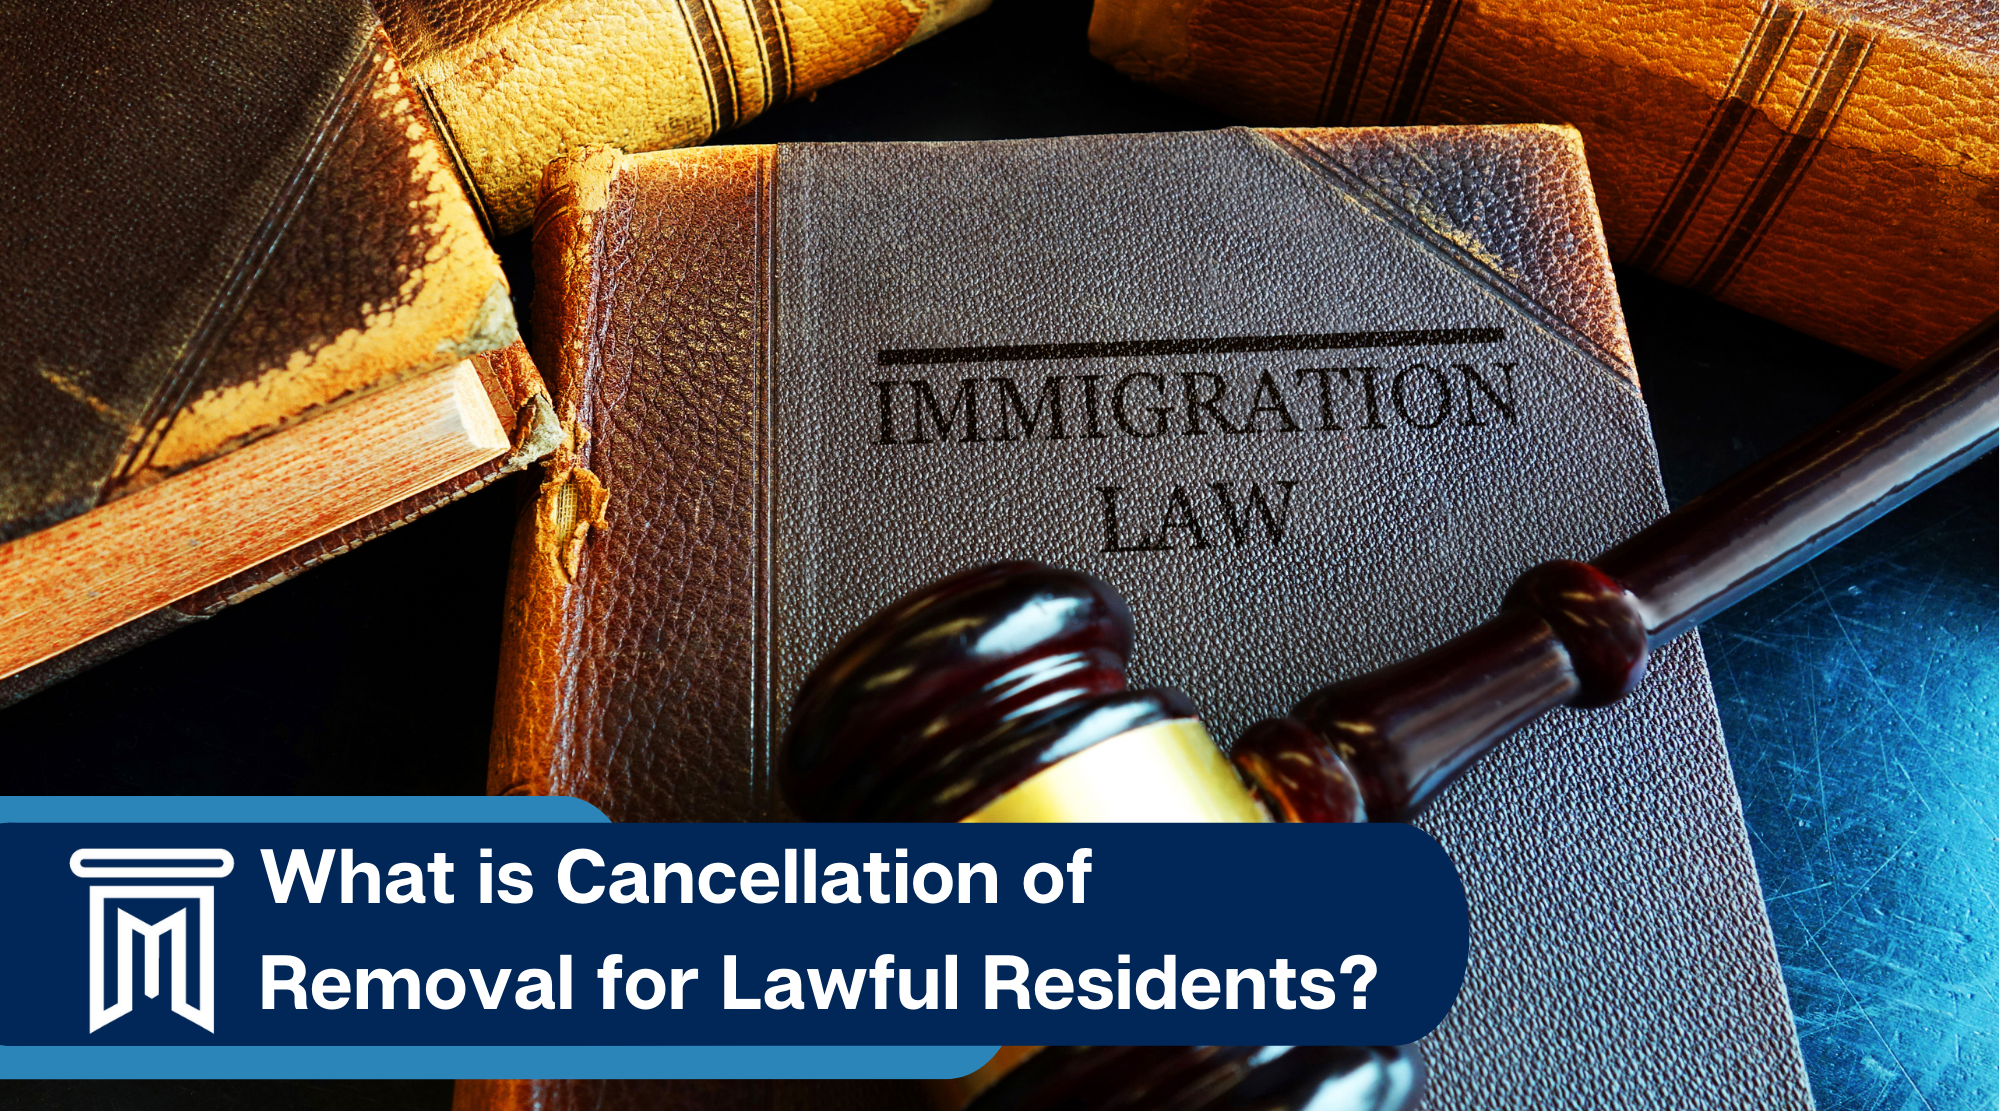 What is Cancellation of Renewal for lawful residents?